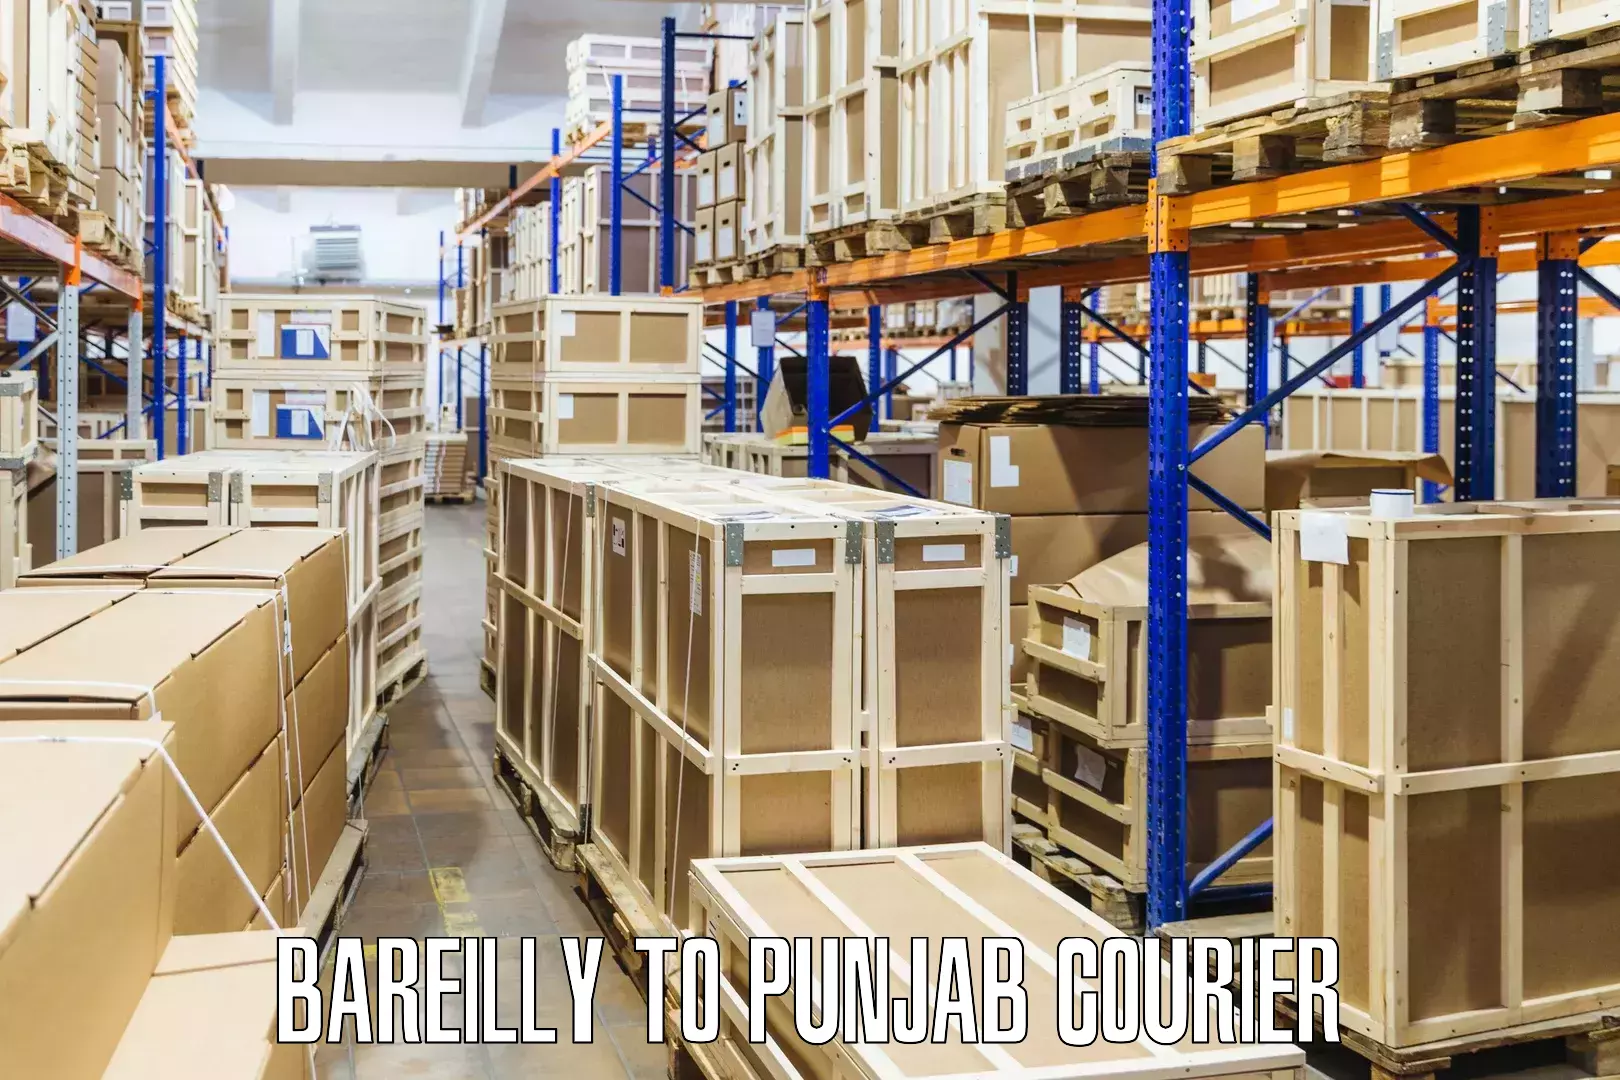 Doorstep delivery service Bareilly to Punjab